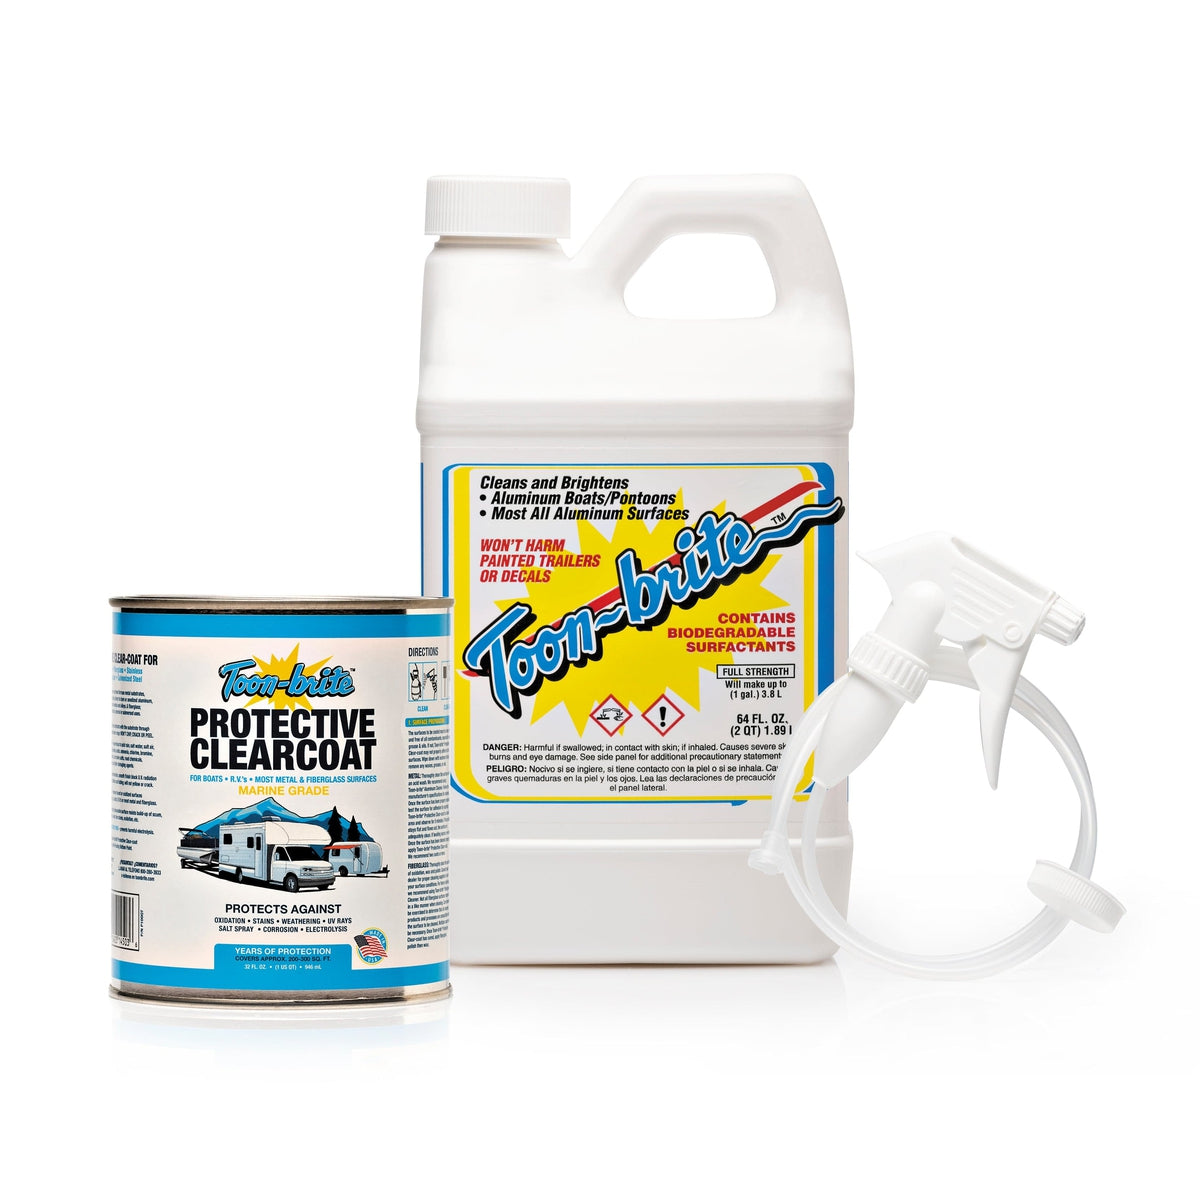 M & L Marine Qualifies for Free Shipping M & L Marine Aluminum Cleaner & Clearcoat Kit #BP1000